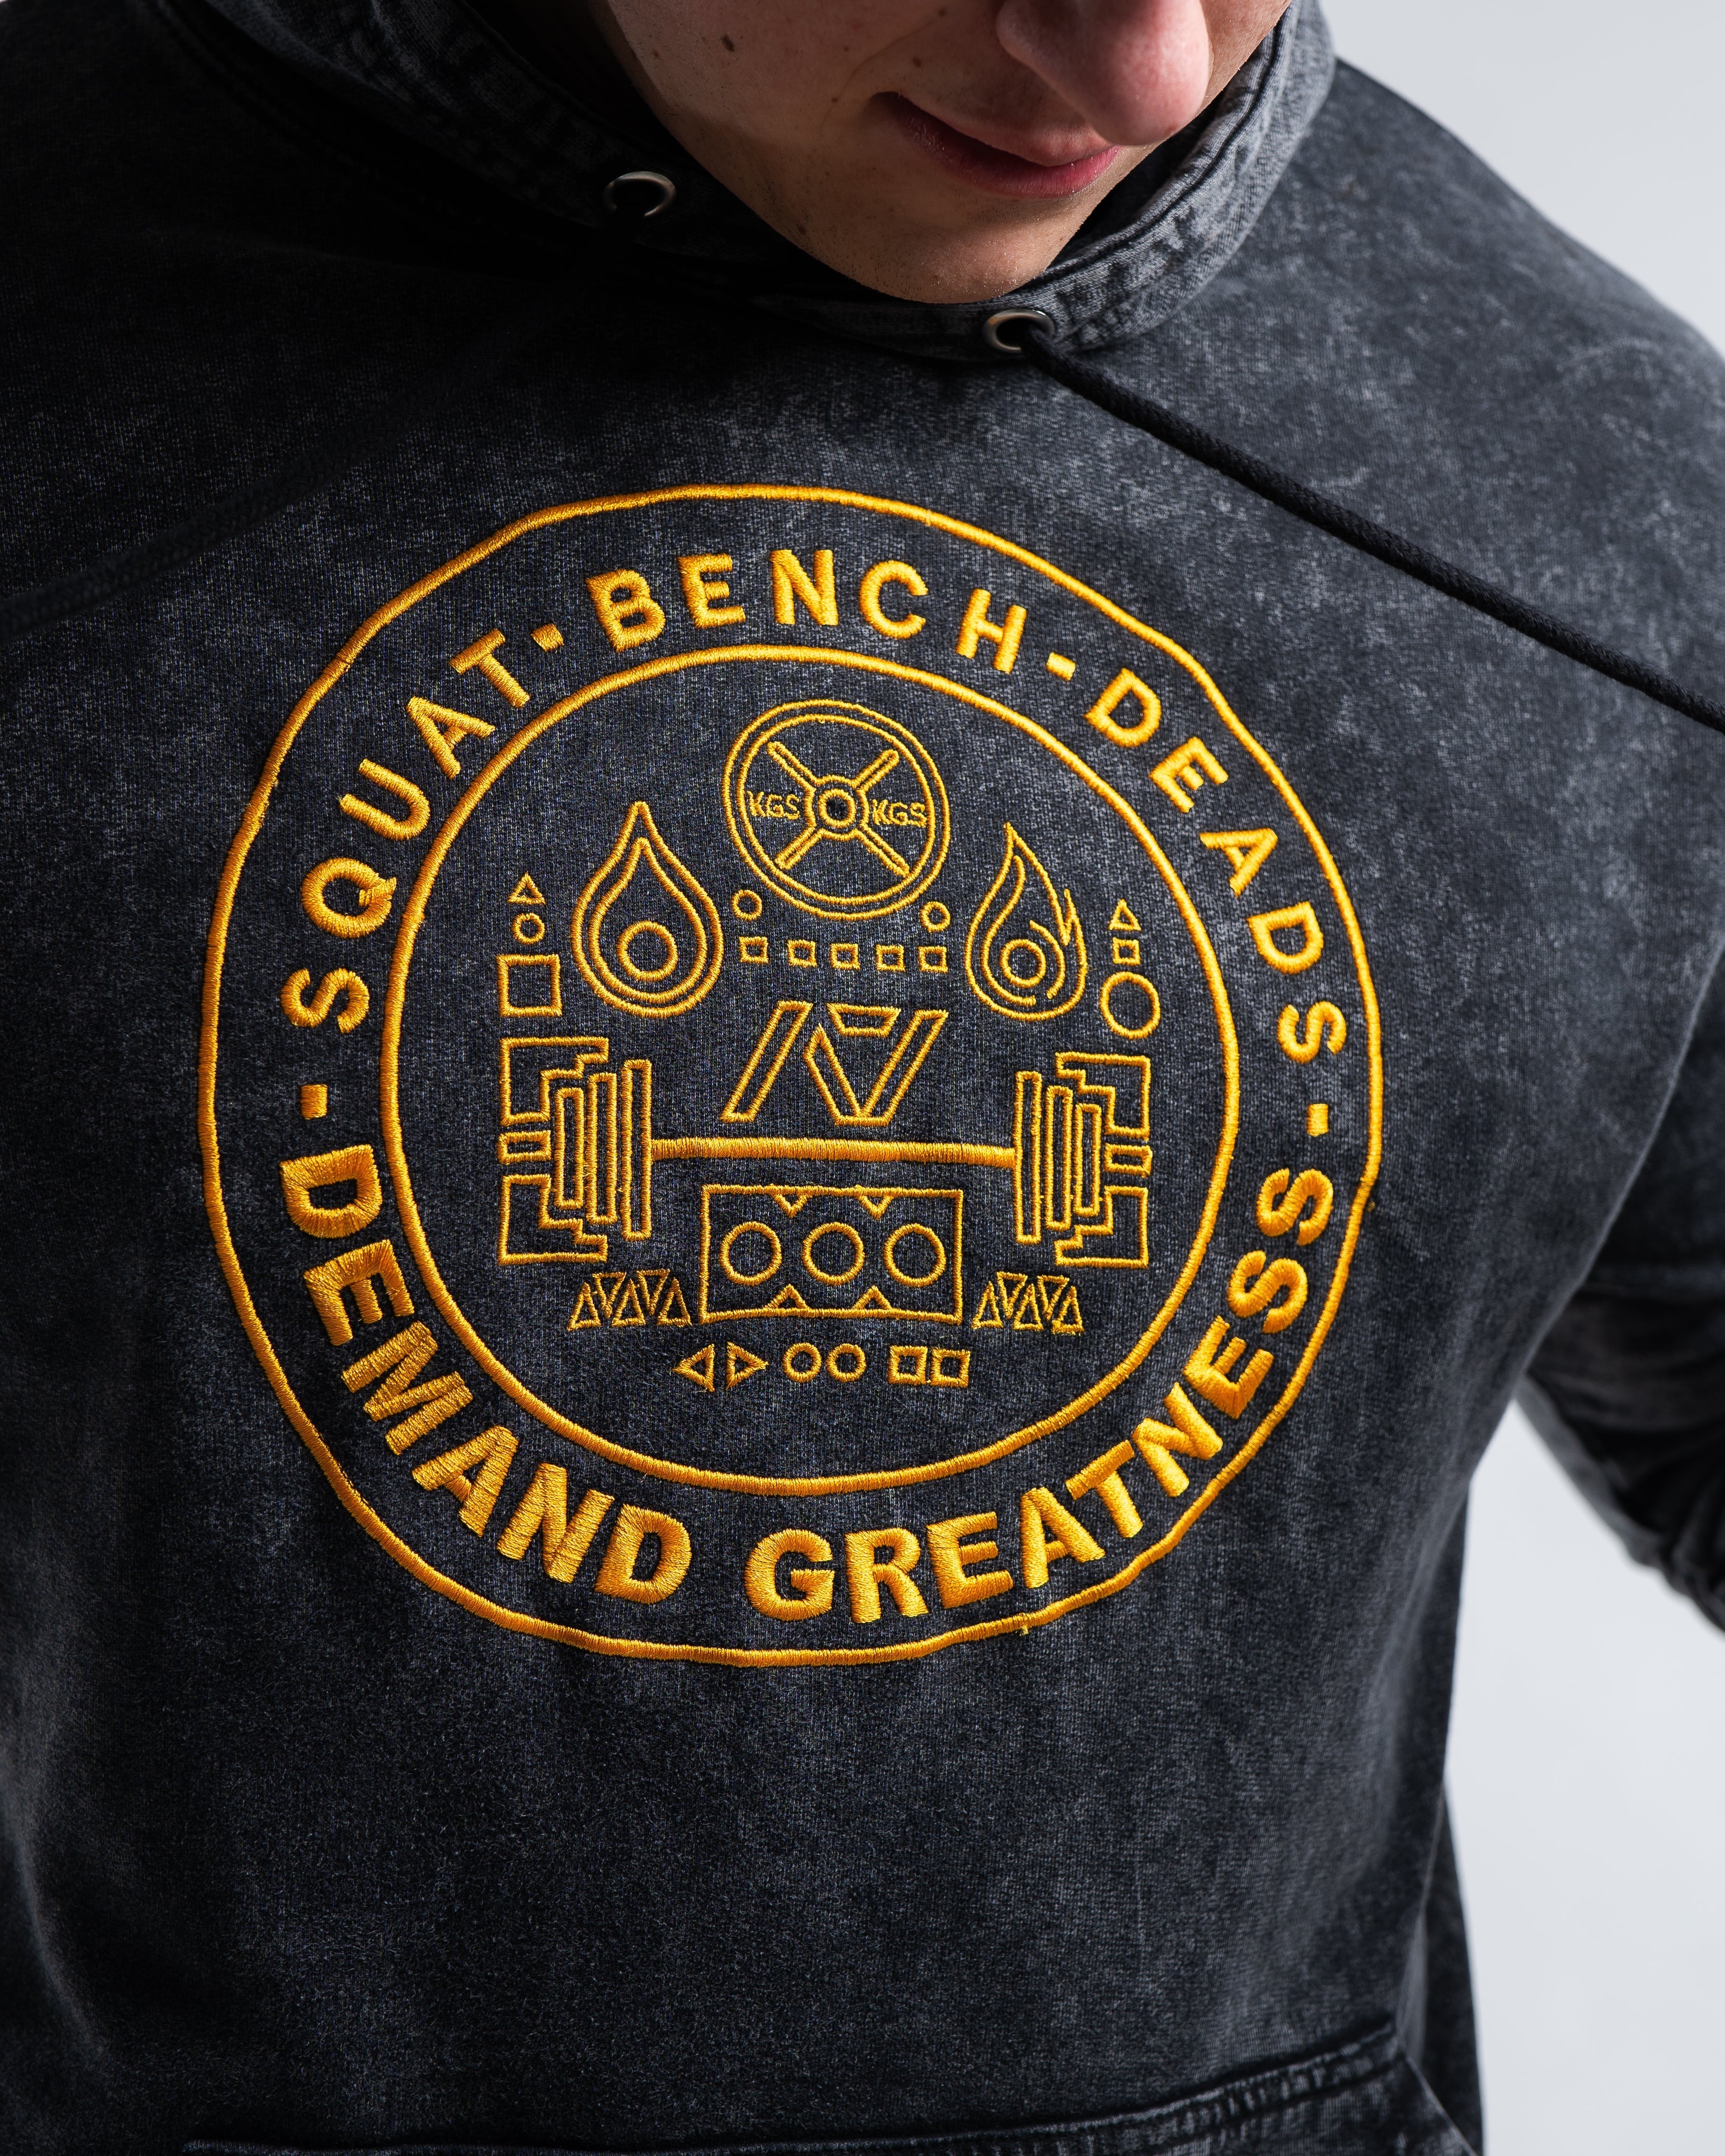 A single thread serves as the foundation of this collection. Thread, thoughtfully woven together to create a stronger bond, manifesting the showcase of its strength. Each strand connects the mindset of the athlete through their actions. Building a stronger foundation and the development of their Gold Medal Mentality. Genouill�res powerlifting shipping to France, Spain, Ireland, Germany, Italy, Sweden and EU.